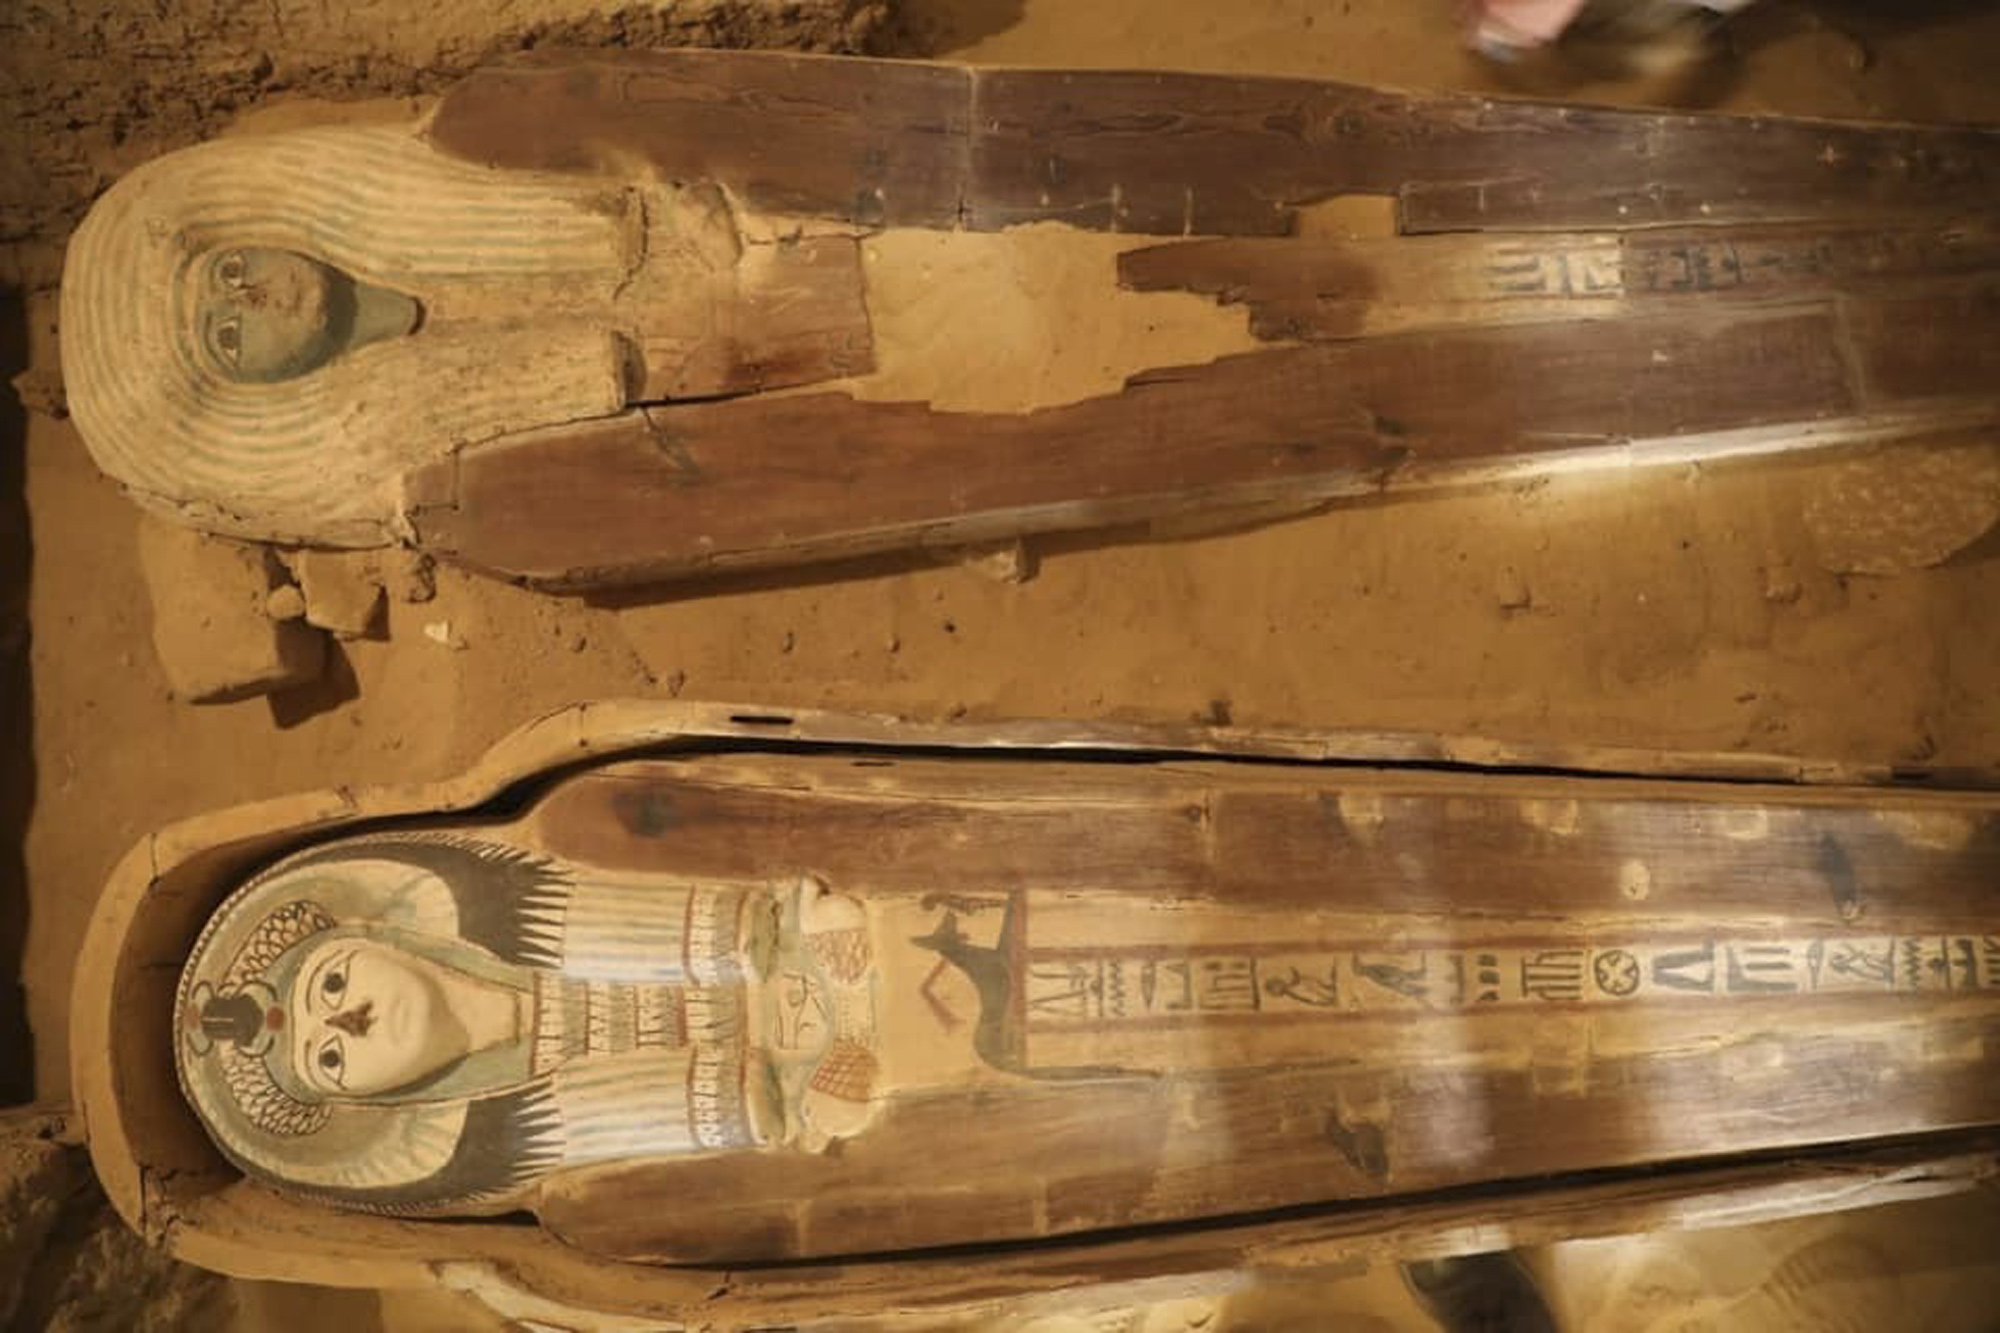 Incredible 4,500-year-old cemetery discovered near Egypt's Giza pyramids